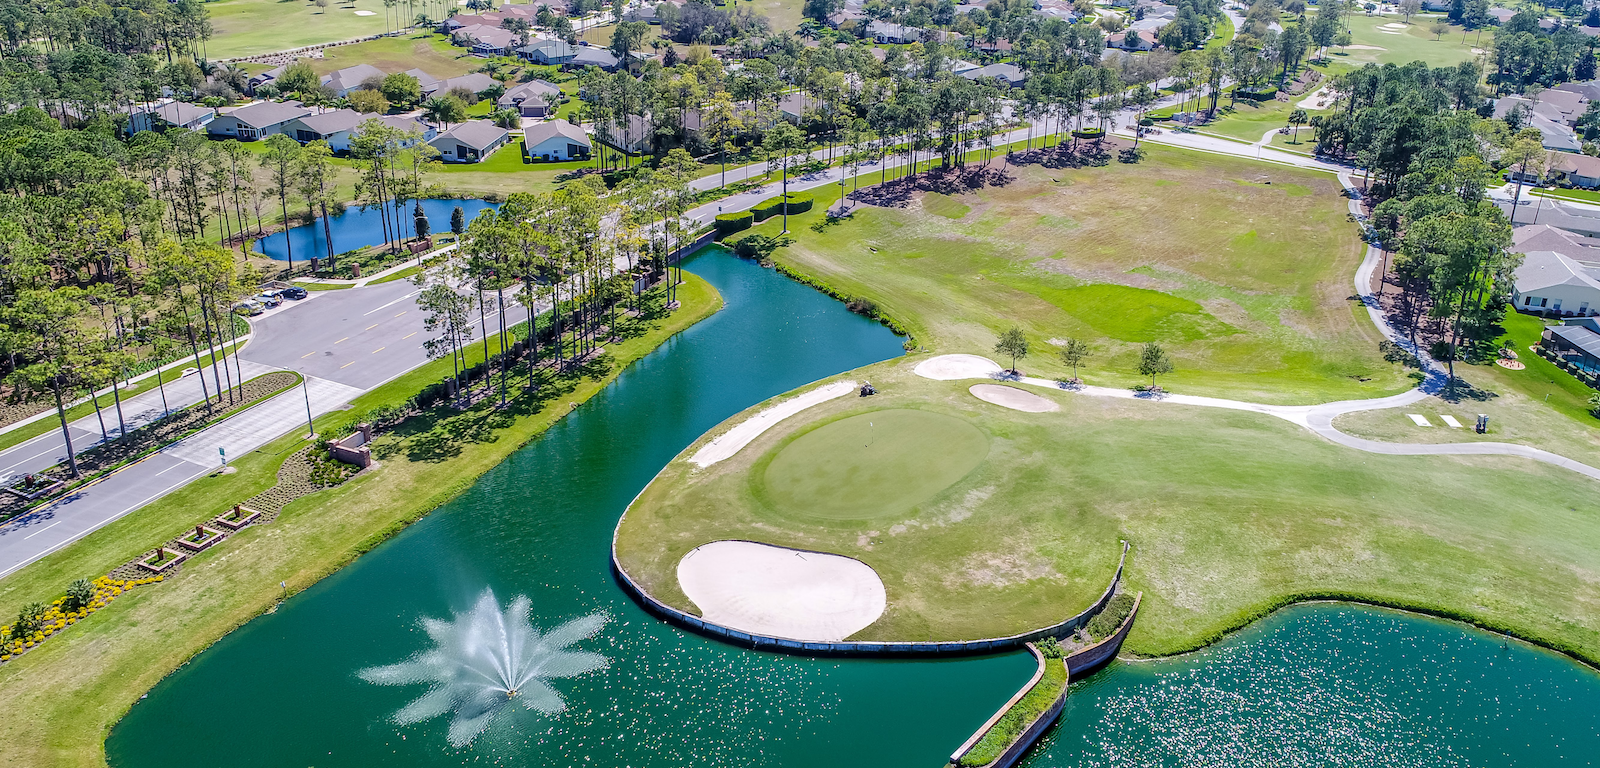 Golfing - aerial view of golf course